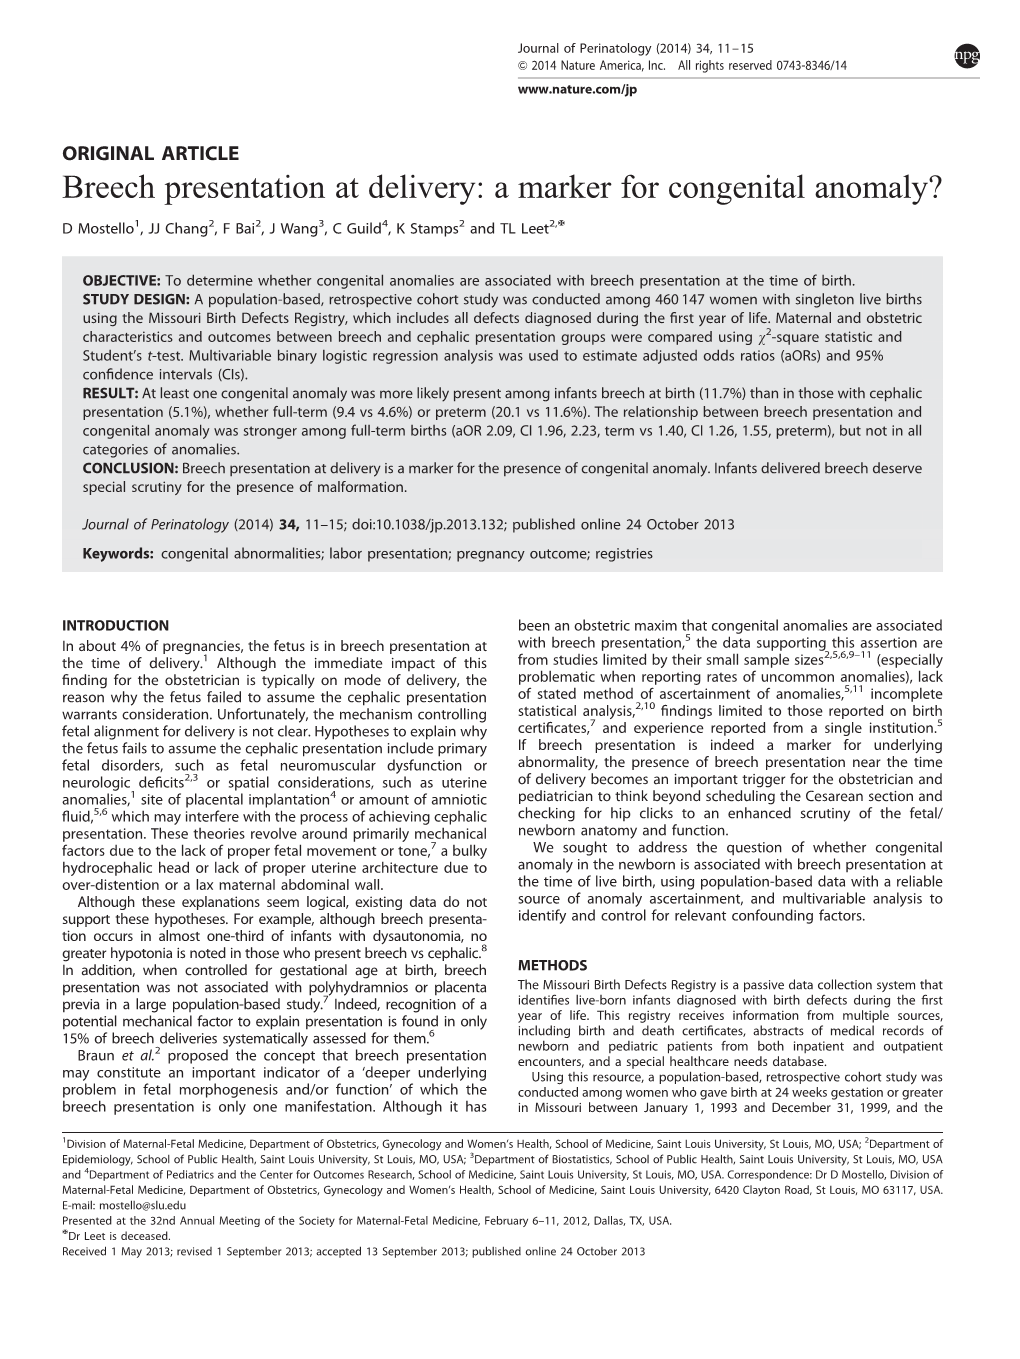 Breech Presentation at Delivery: a Marker for Congenital Anomaly?